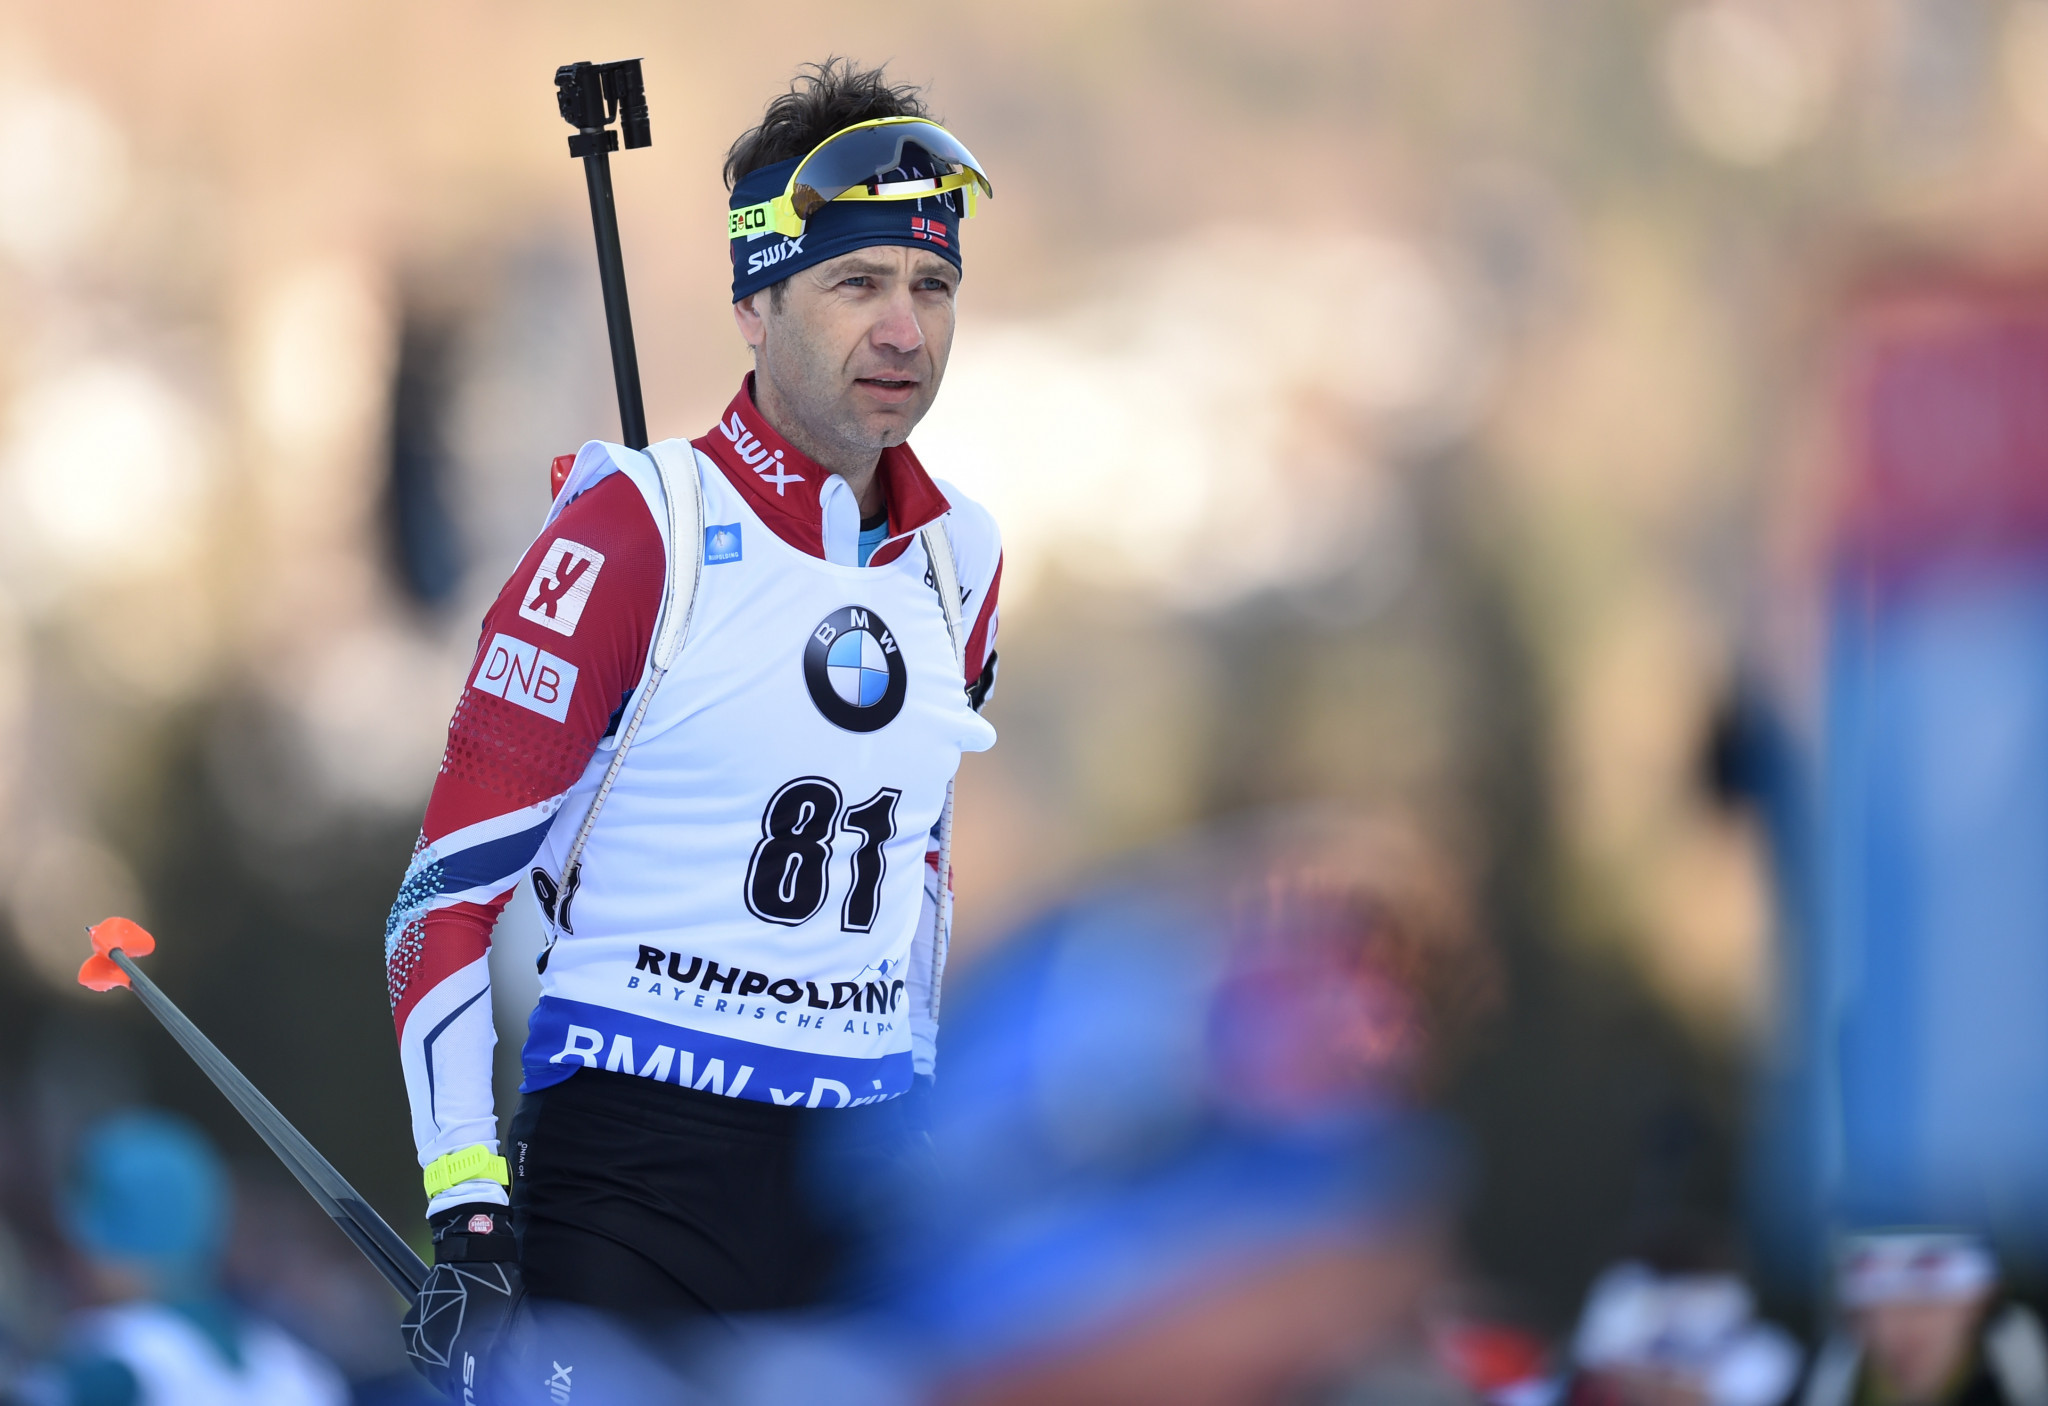 Ole Einar Bjørndalen has not qualified for Pyeongchang 2018 ©Getty Images 